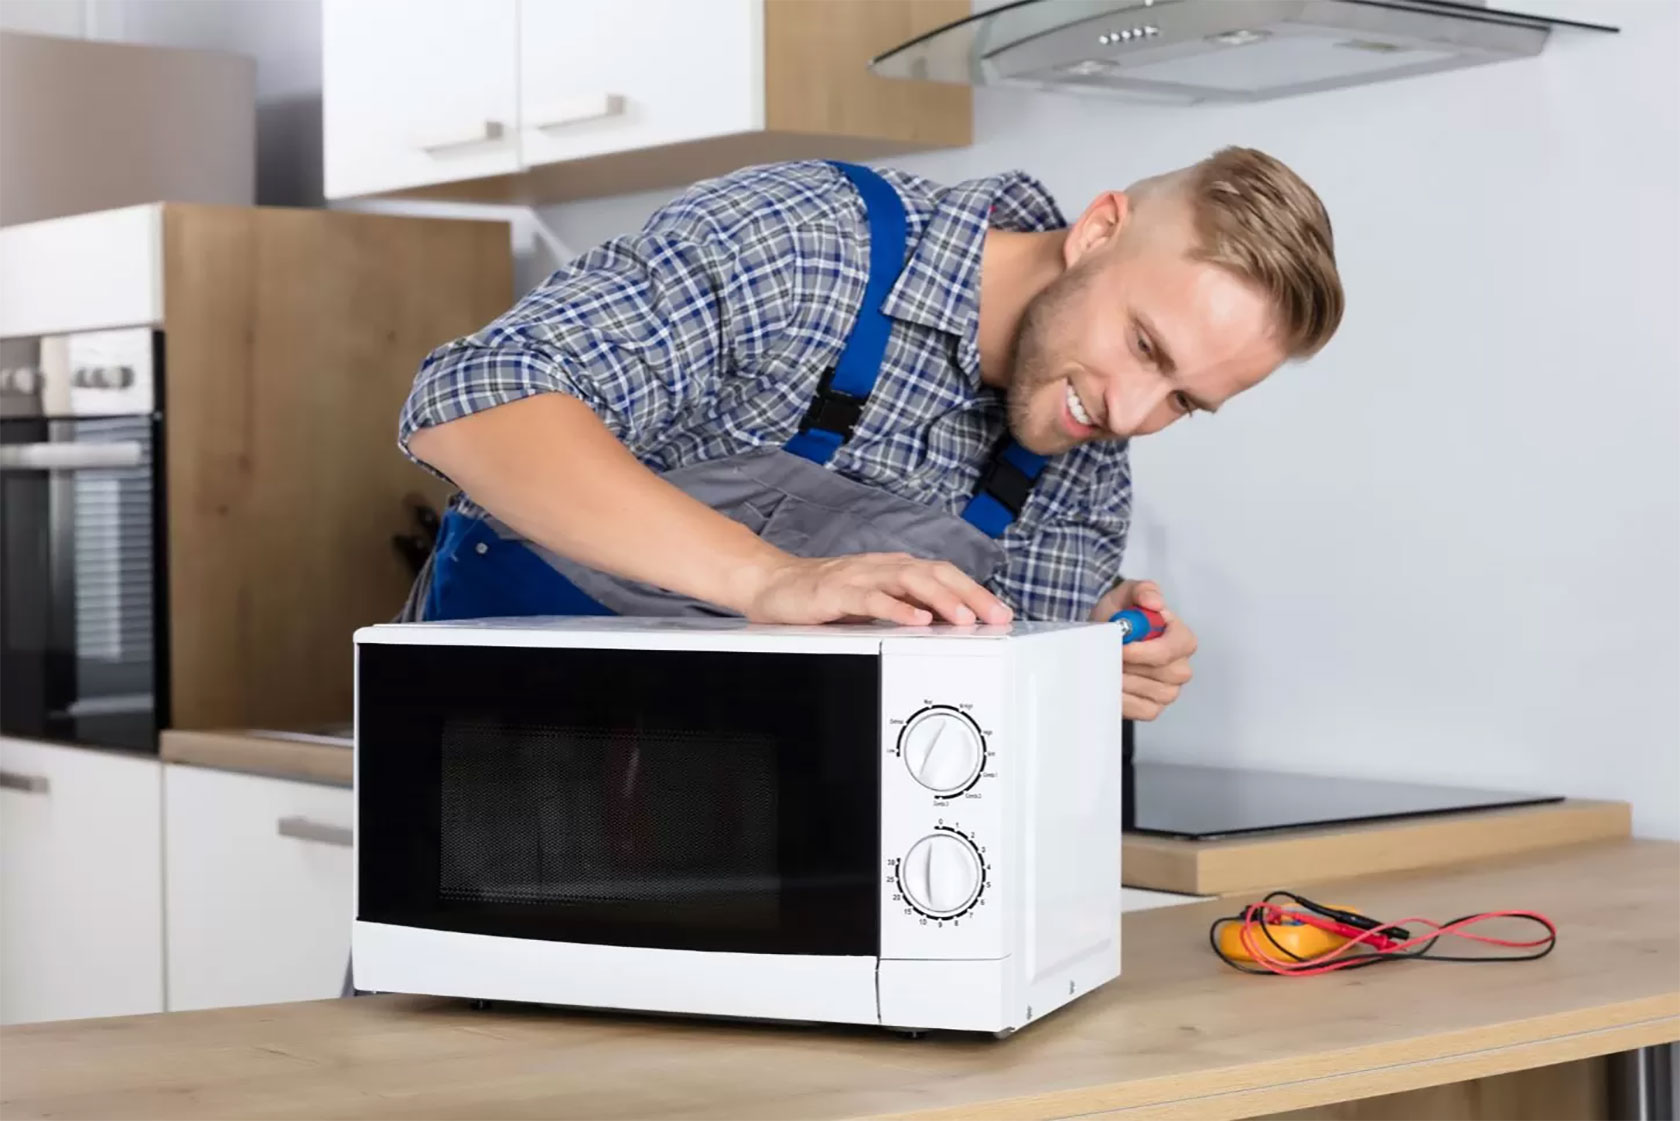 How To Repair Microwave Oven